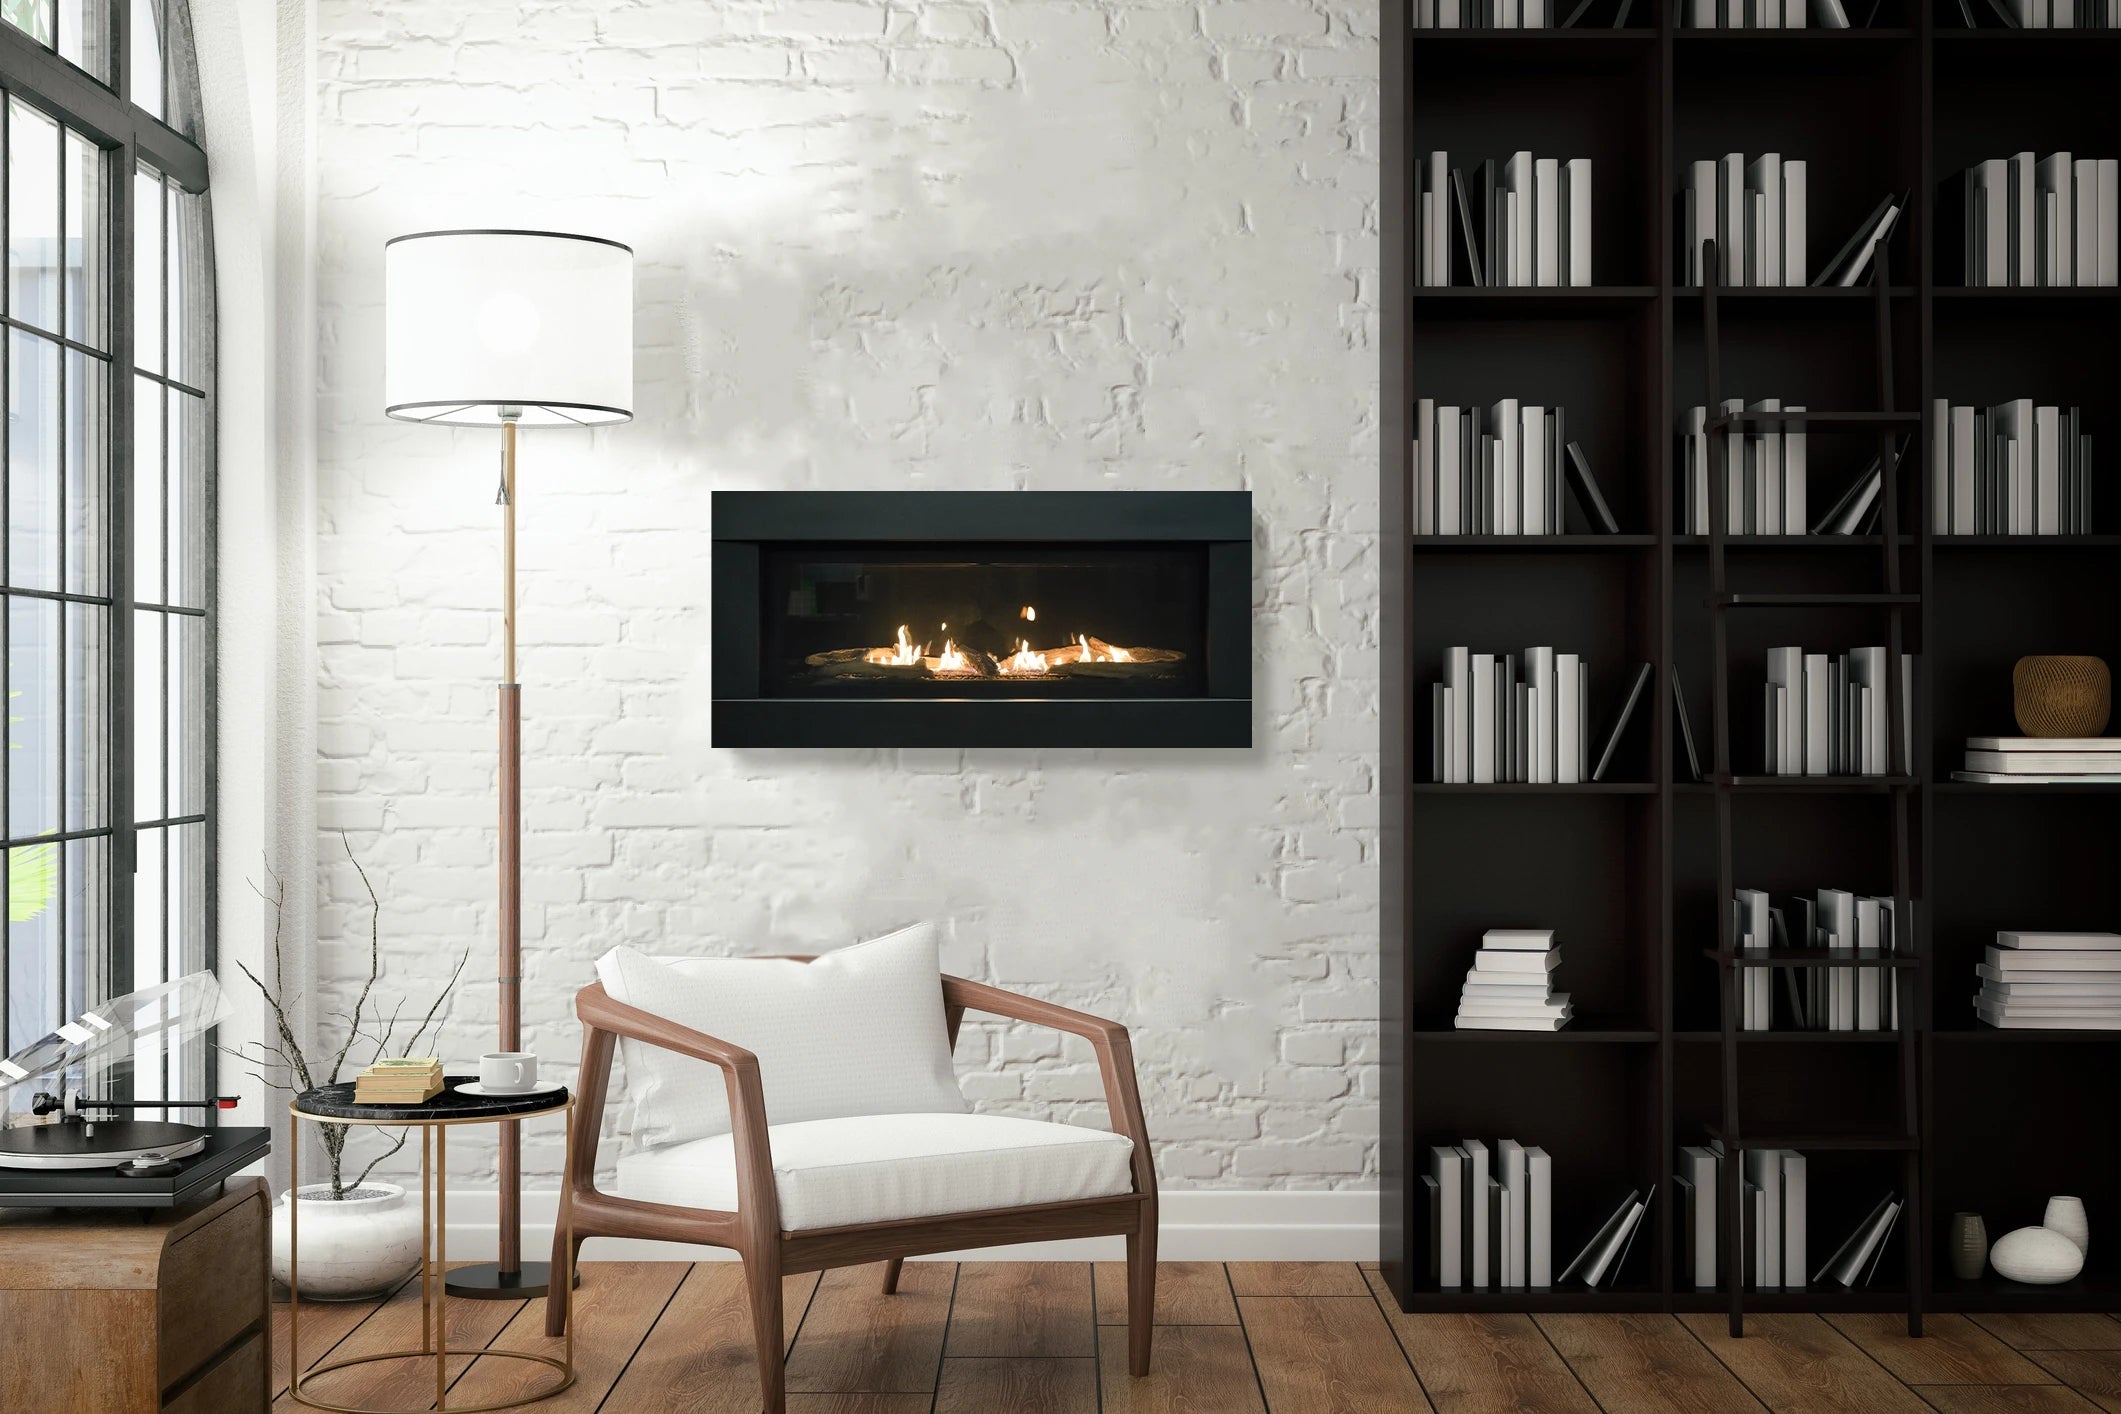 Sierra Flame Stanford 55" Direct Vent Linear Gas Fireplace- Lifestyle Book Room